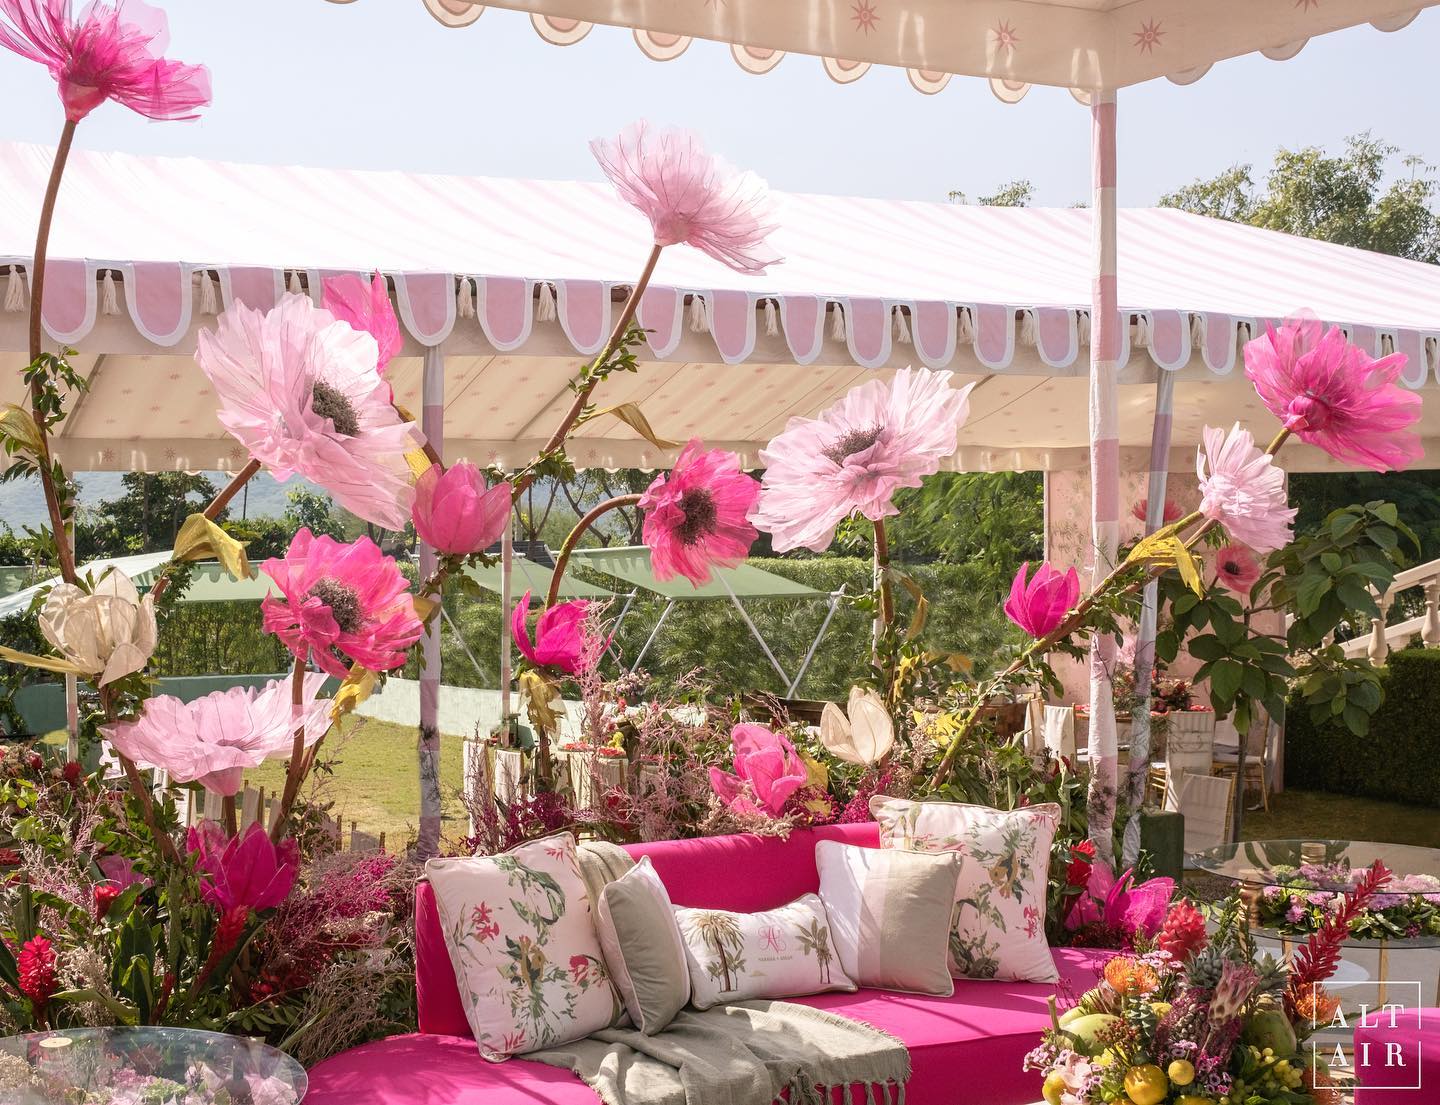 8 Ways To Add That'Barbie Pink' Touch To Your Wedding